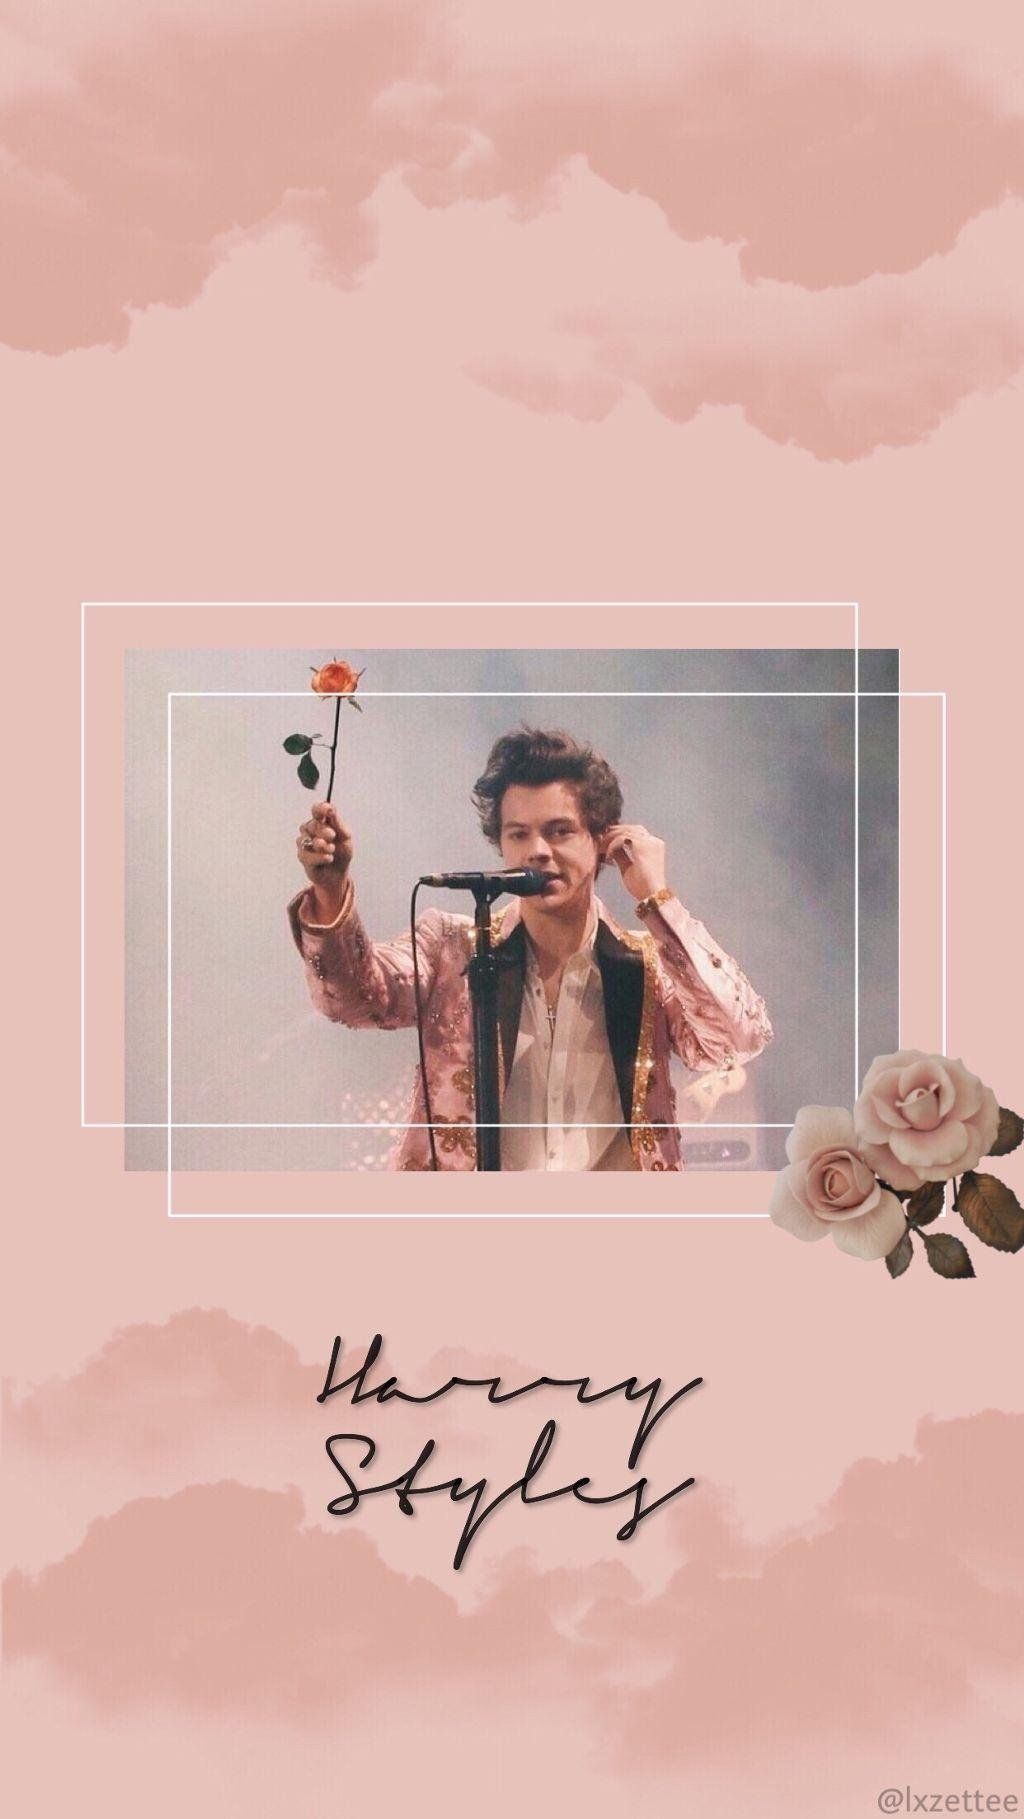 Harry Styles Aesthetic Wallpaper Free Harry Styles Aesthetic Background